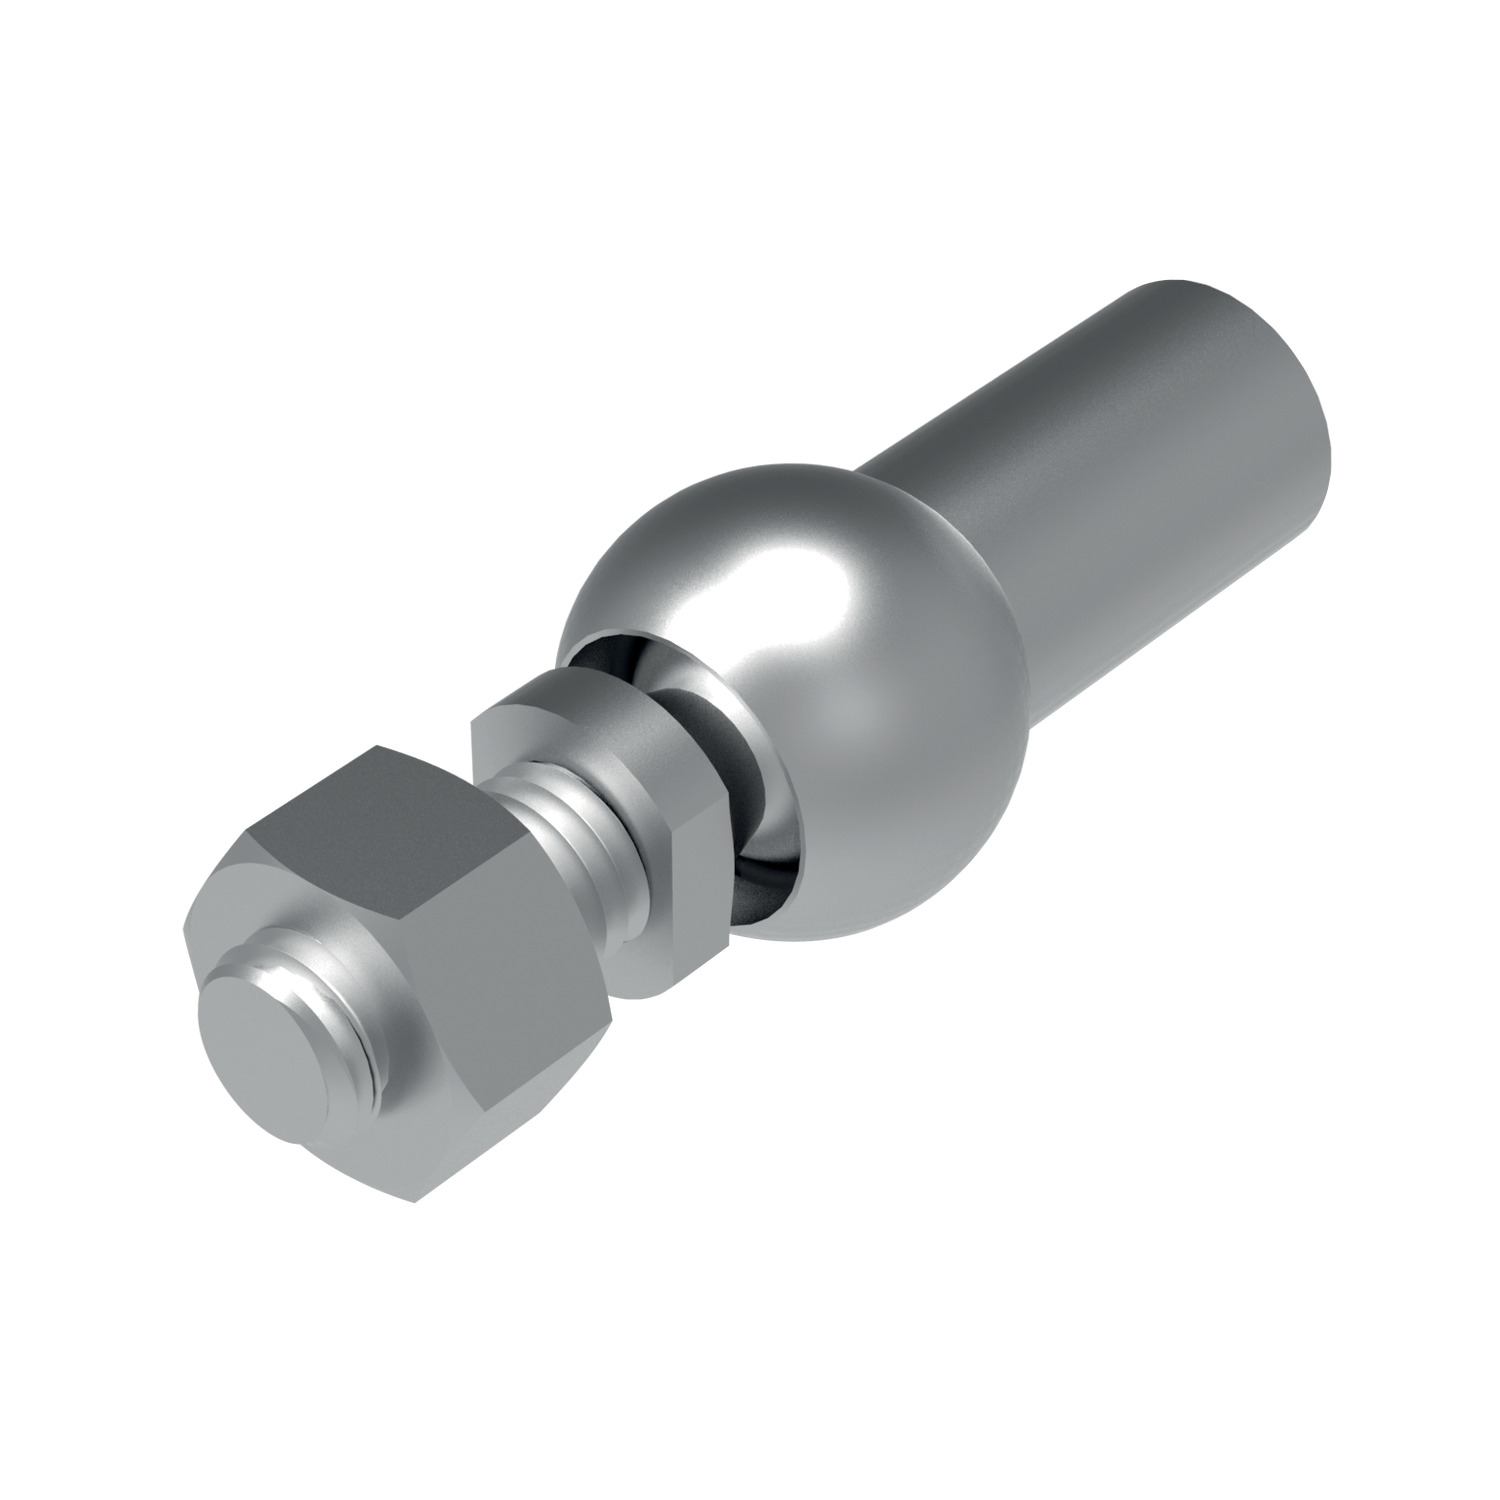 Product R3500, Axial Ball and Socket Joints  / 